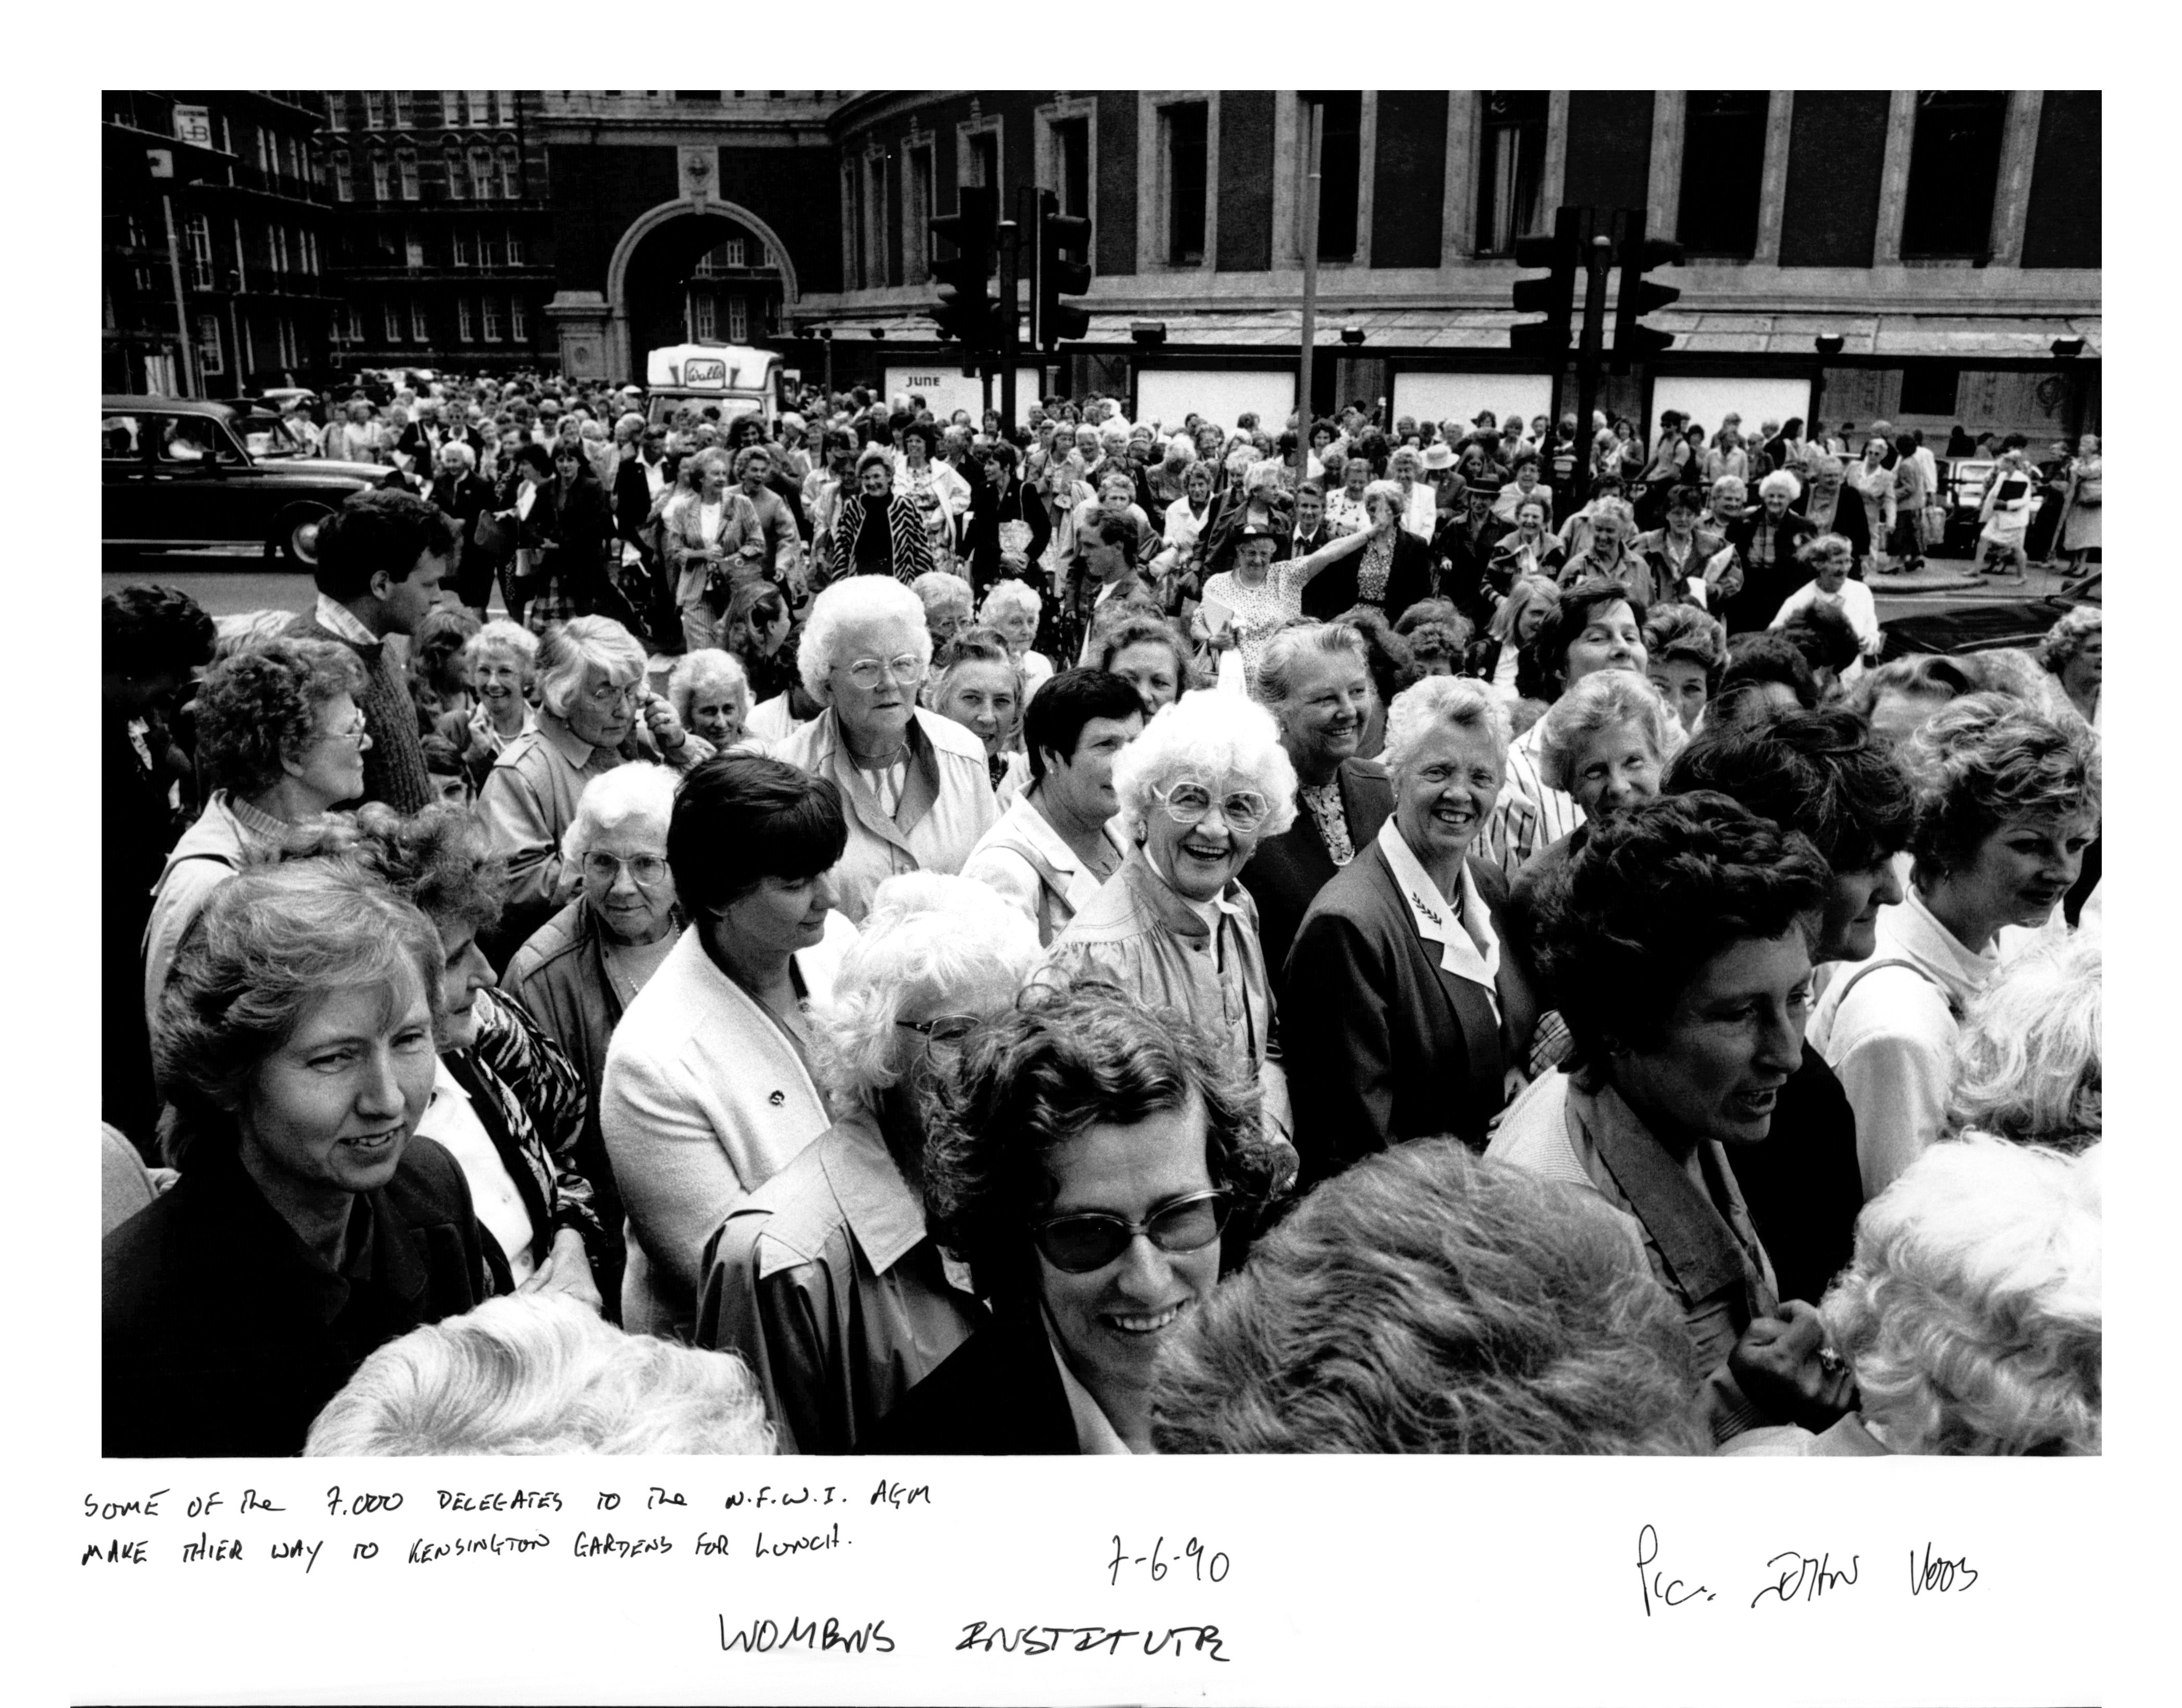 Women’s Institute: Some of the 7,000 delegates to the WI AGM make their way to Kensington Gardens for lunch, 1990